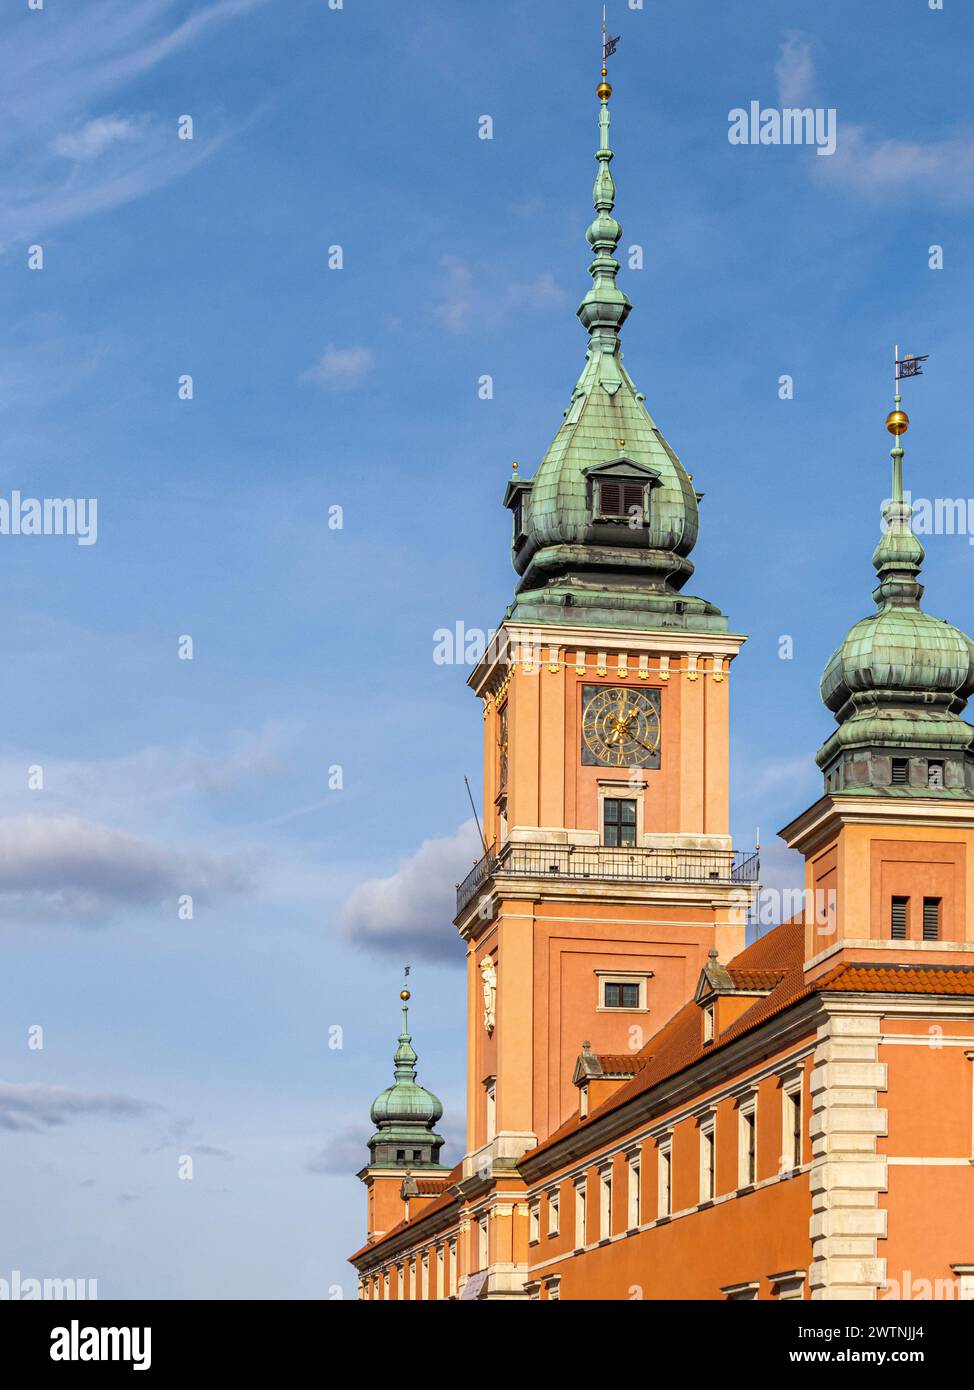 The clock tower of the Royal Castle in Warsaw against a blue sky with white clouds. Stock Photo